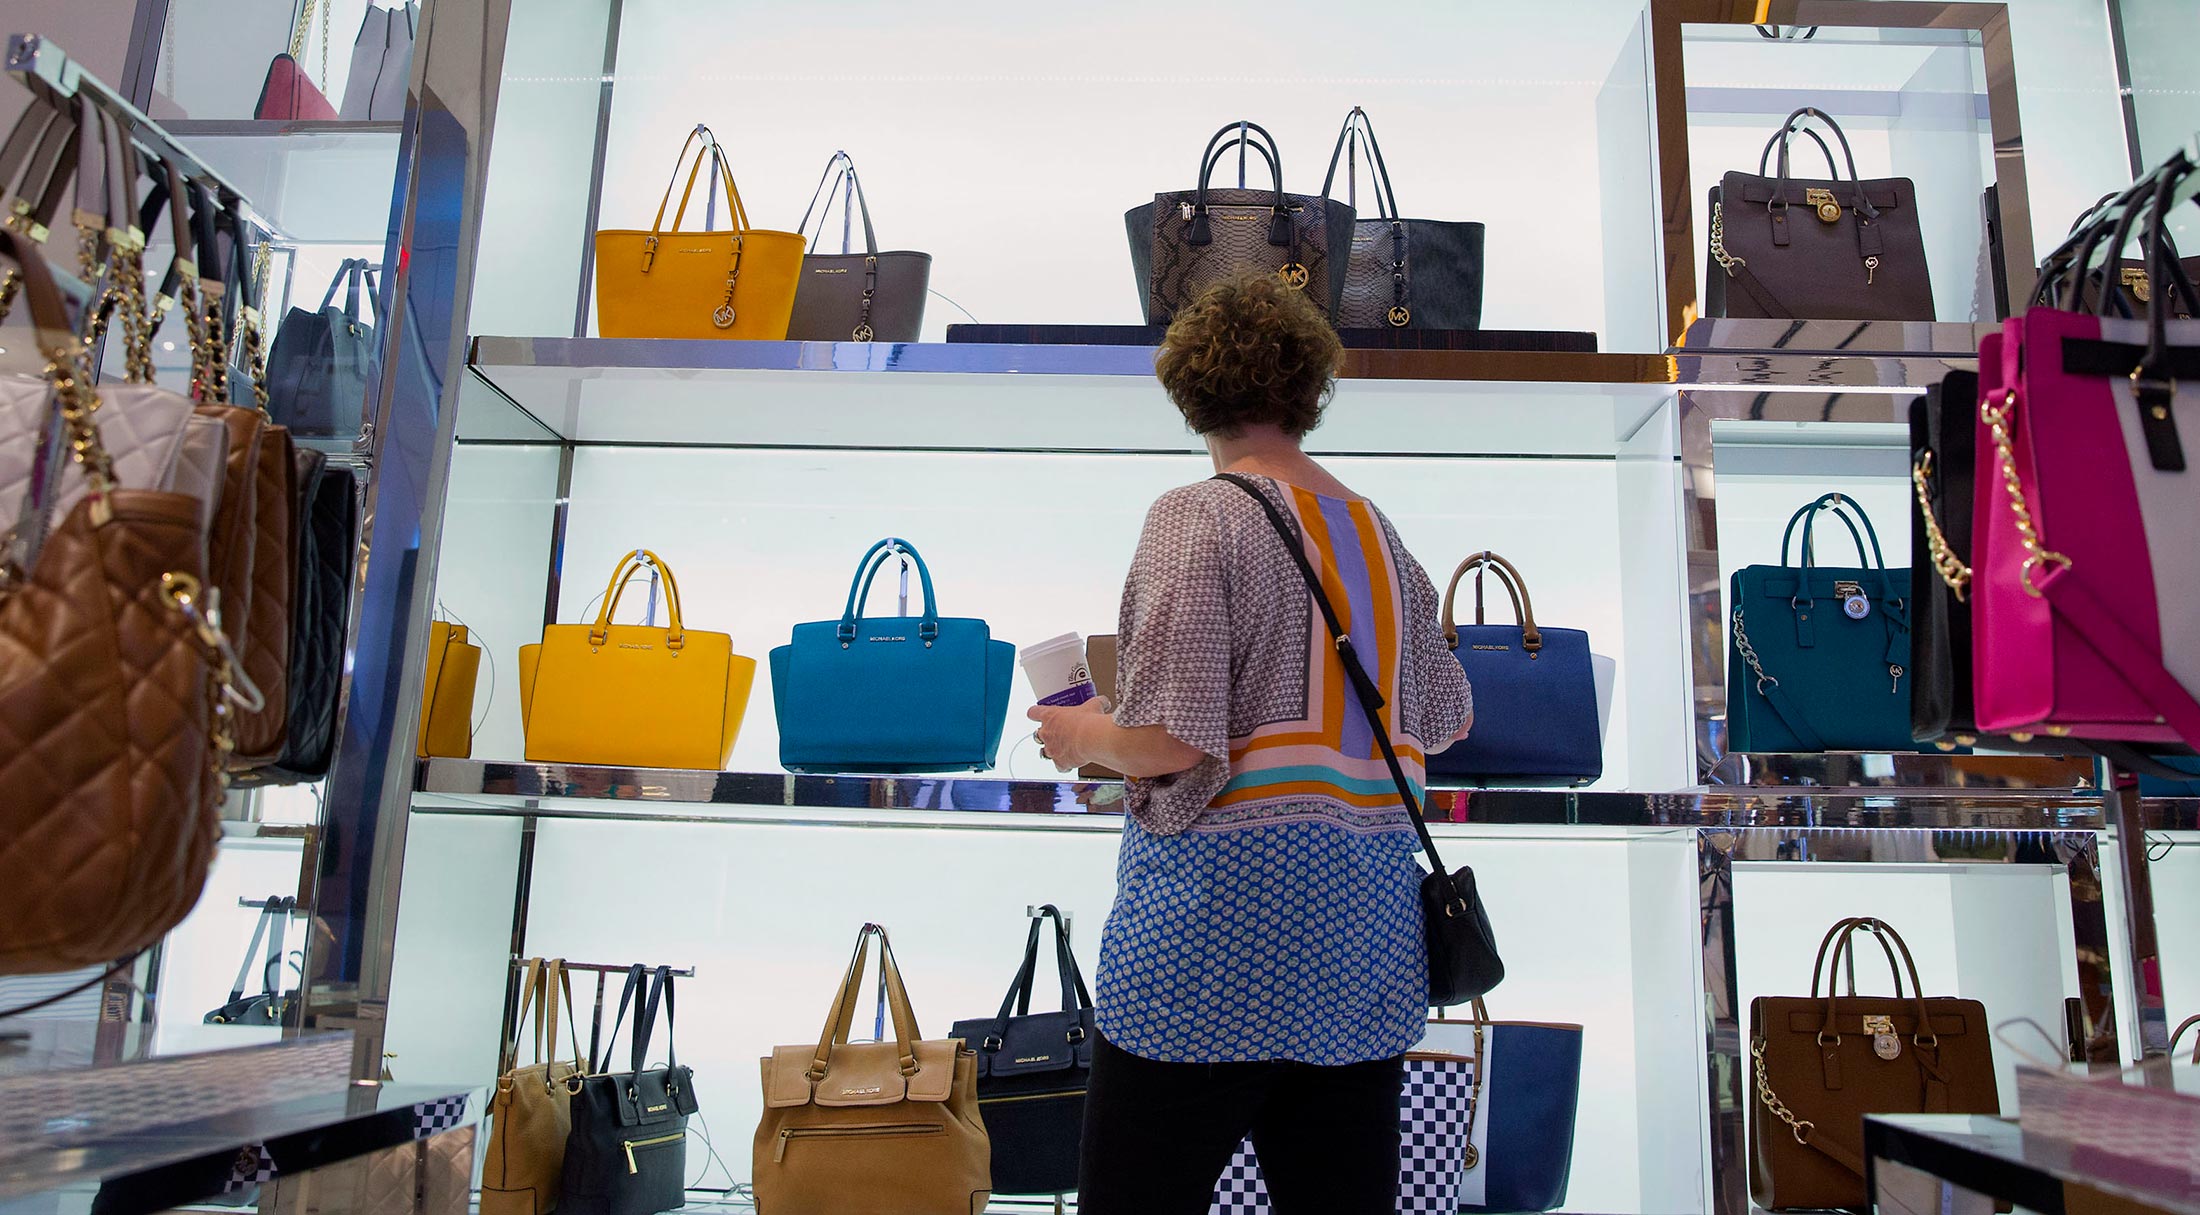 Luxury Brand Coach Moves to Sell Shoes - Bloomberg